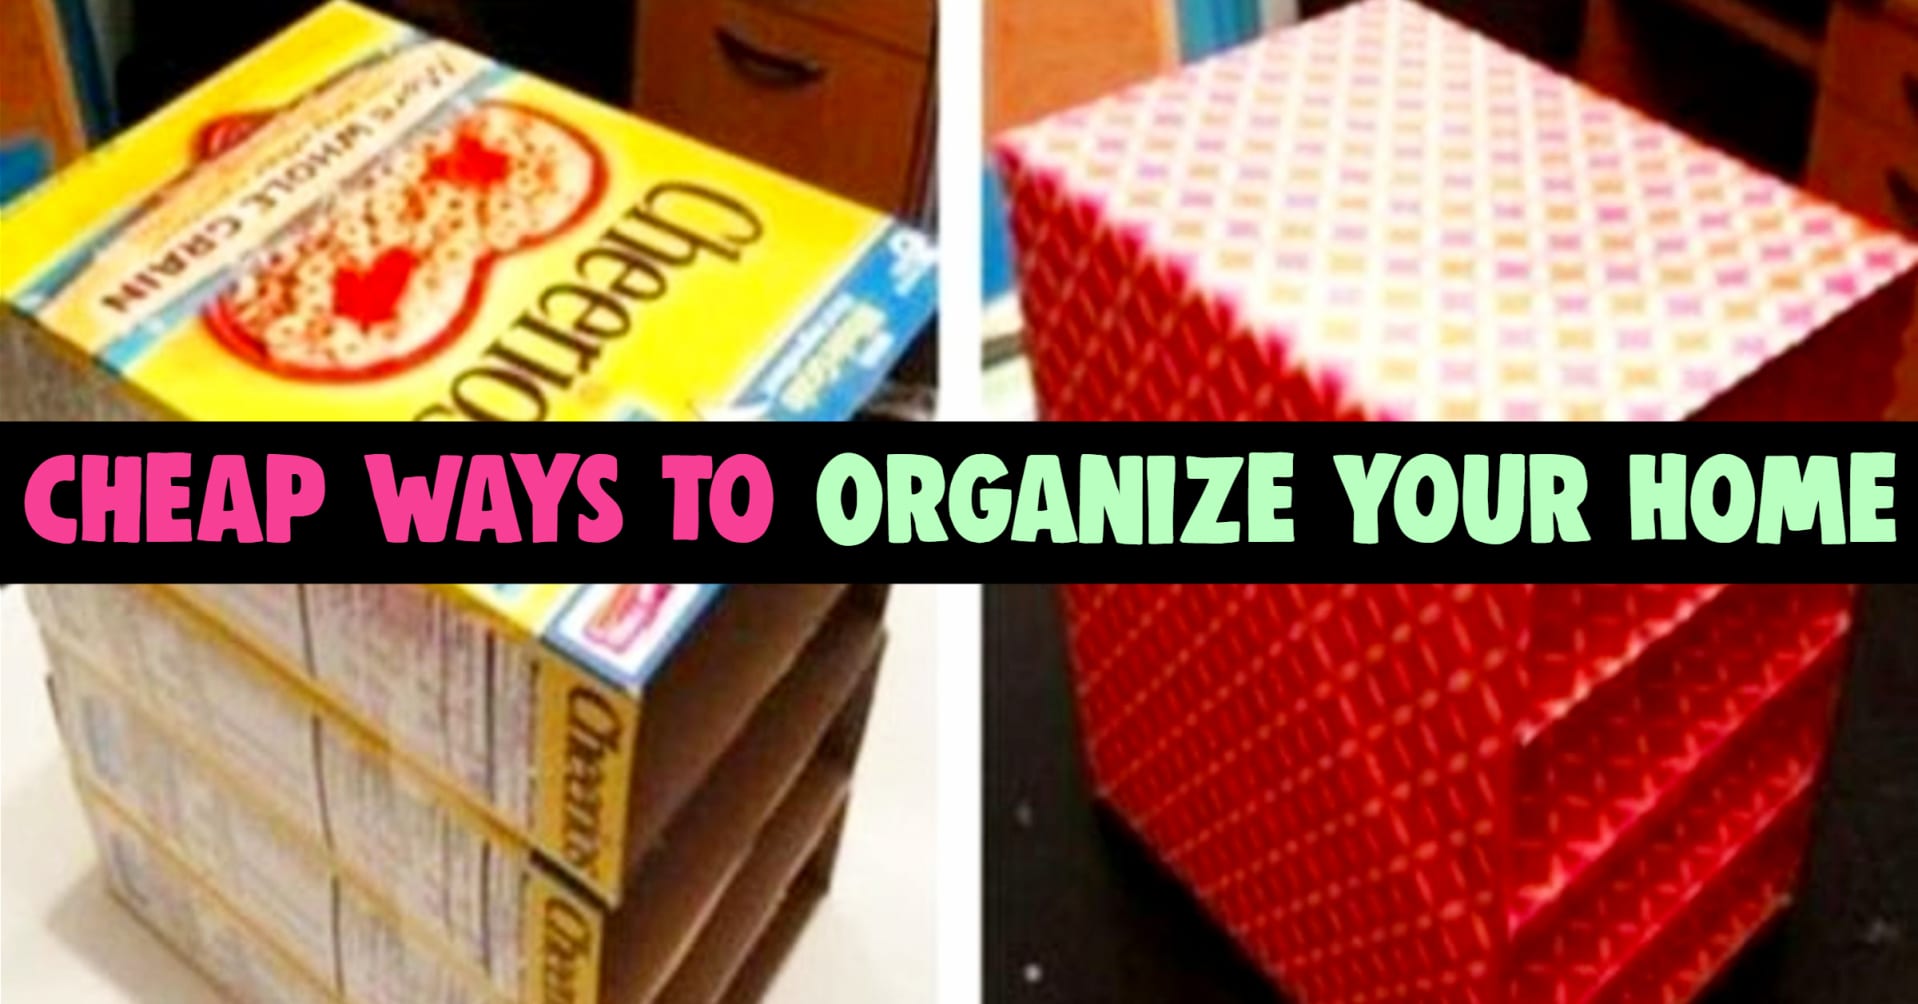 Home organization services OR home organization HACKS!  These inexpensive home organization ideas are cheaper than paying a home organization company.  If you watch home organization shows, you will love these professional organizing tips